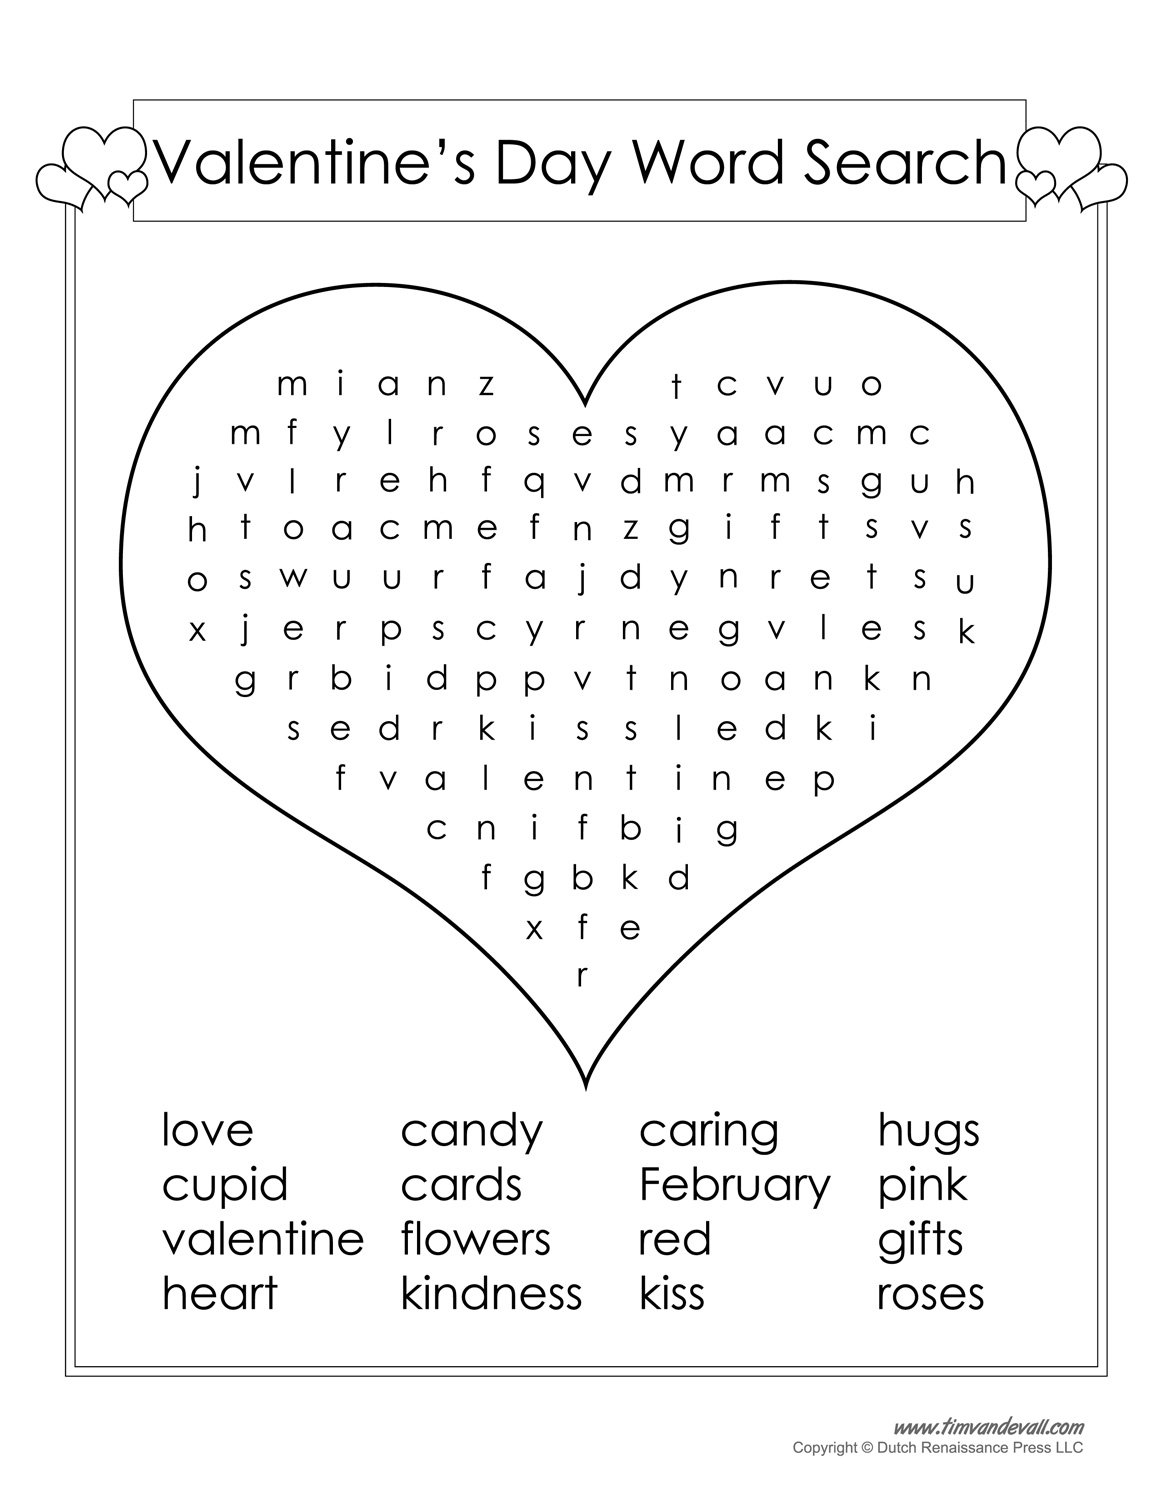 5-printable-valentine-word-search-puzzles-for-kids